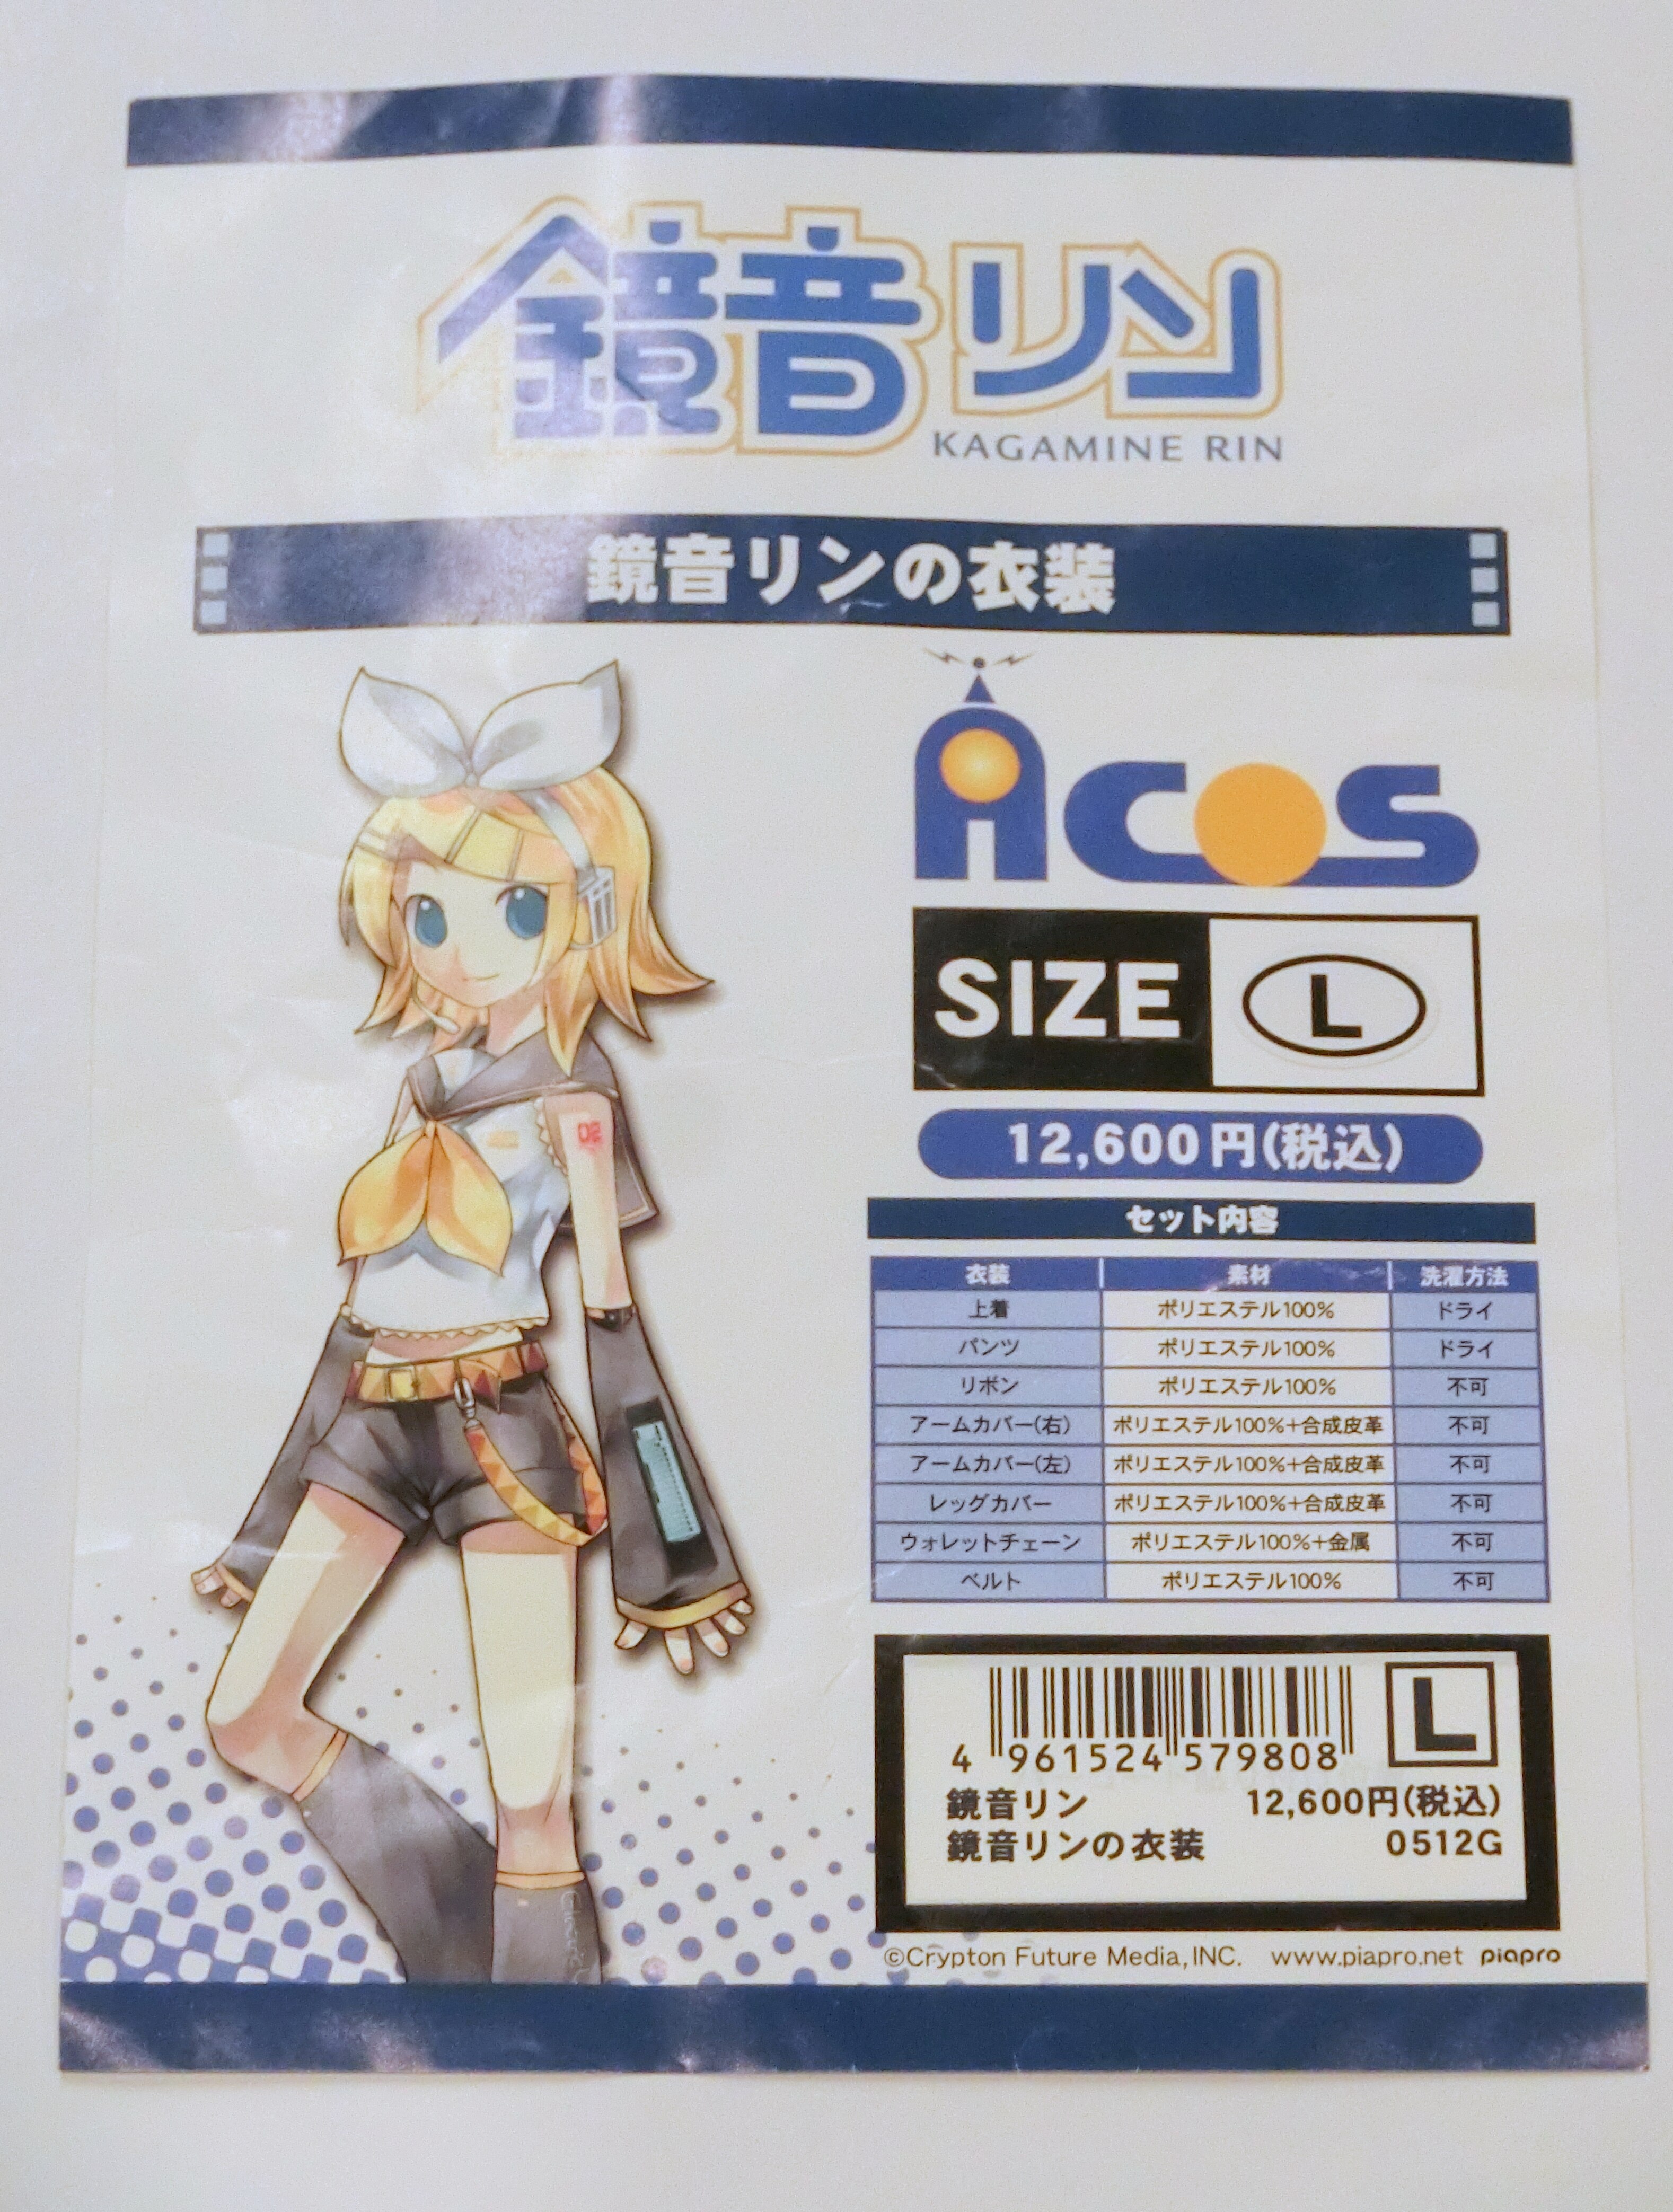 Made By Acos Vocaloid Rin Kagamine Woman L Size Cosplay Outfit Mandarake Online Shop